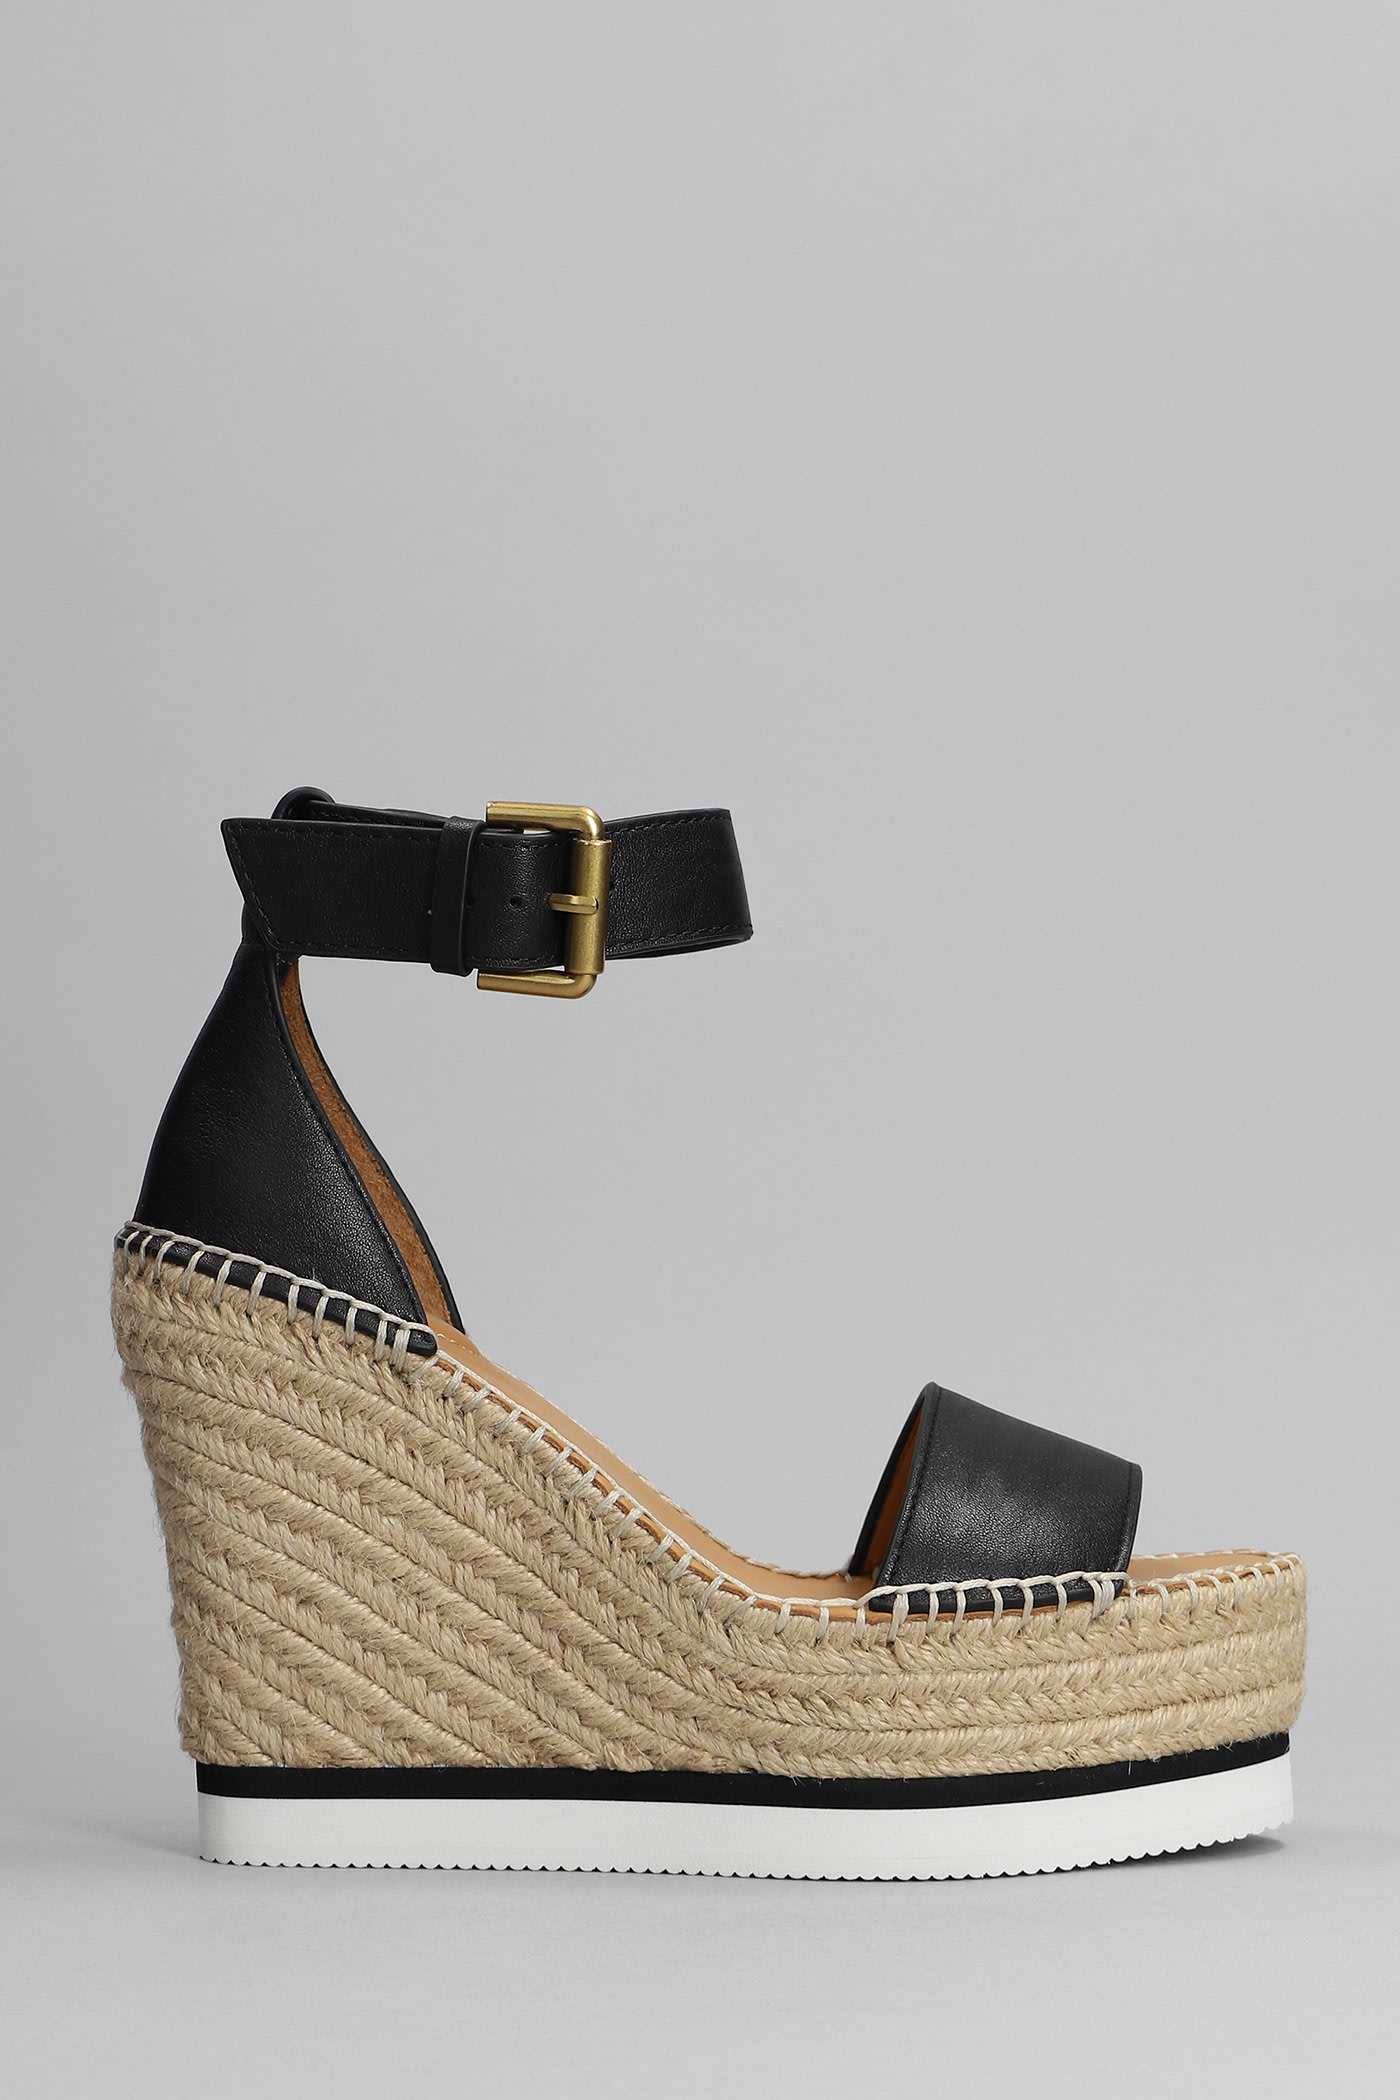 SEE BY CHLOÉ GLYN WEDGES IN BLACK LEATHER